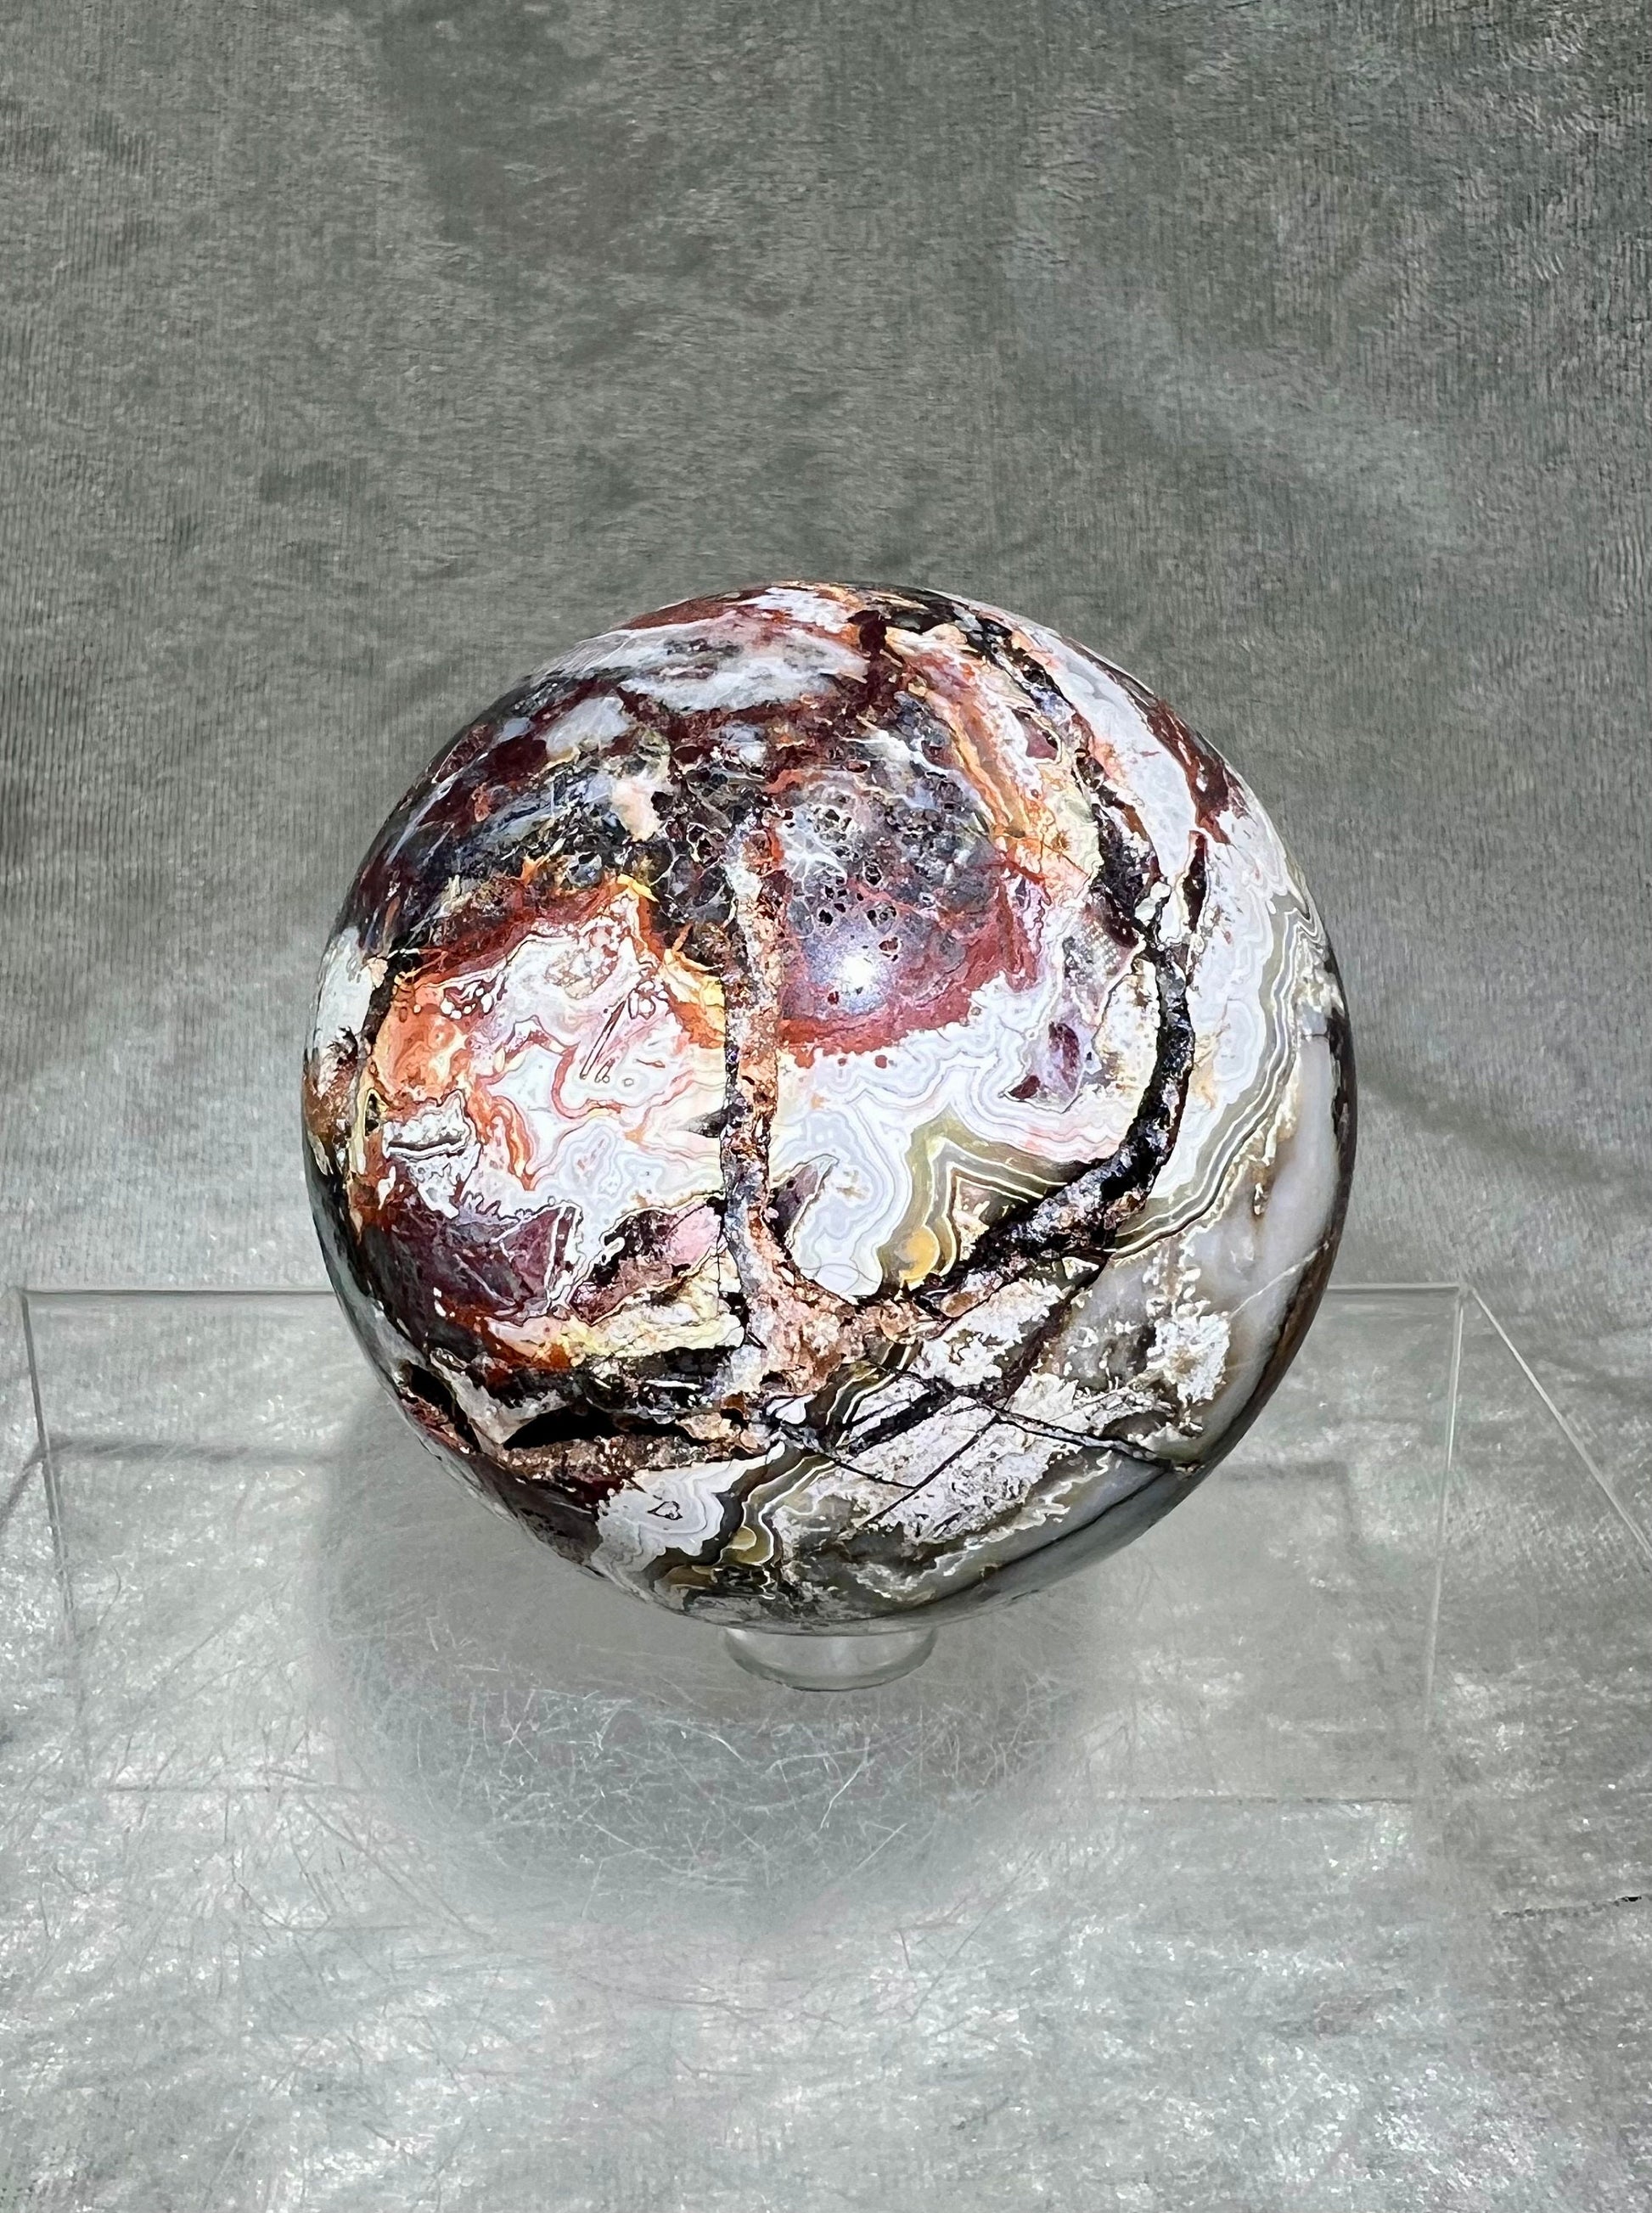 Druzy Mexican Crazy Lace Agate Sphere. 70mm. Awesome Lacing And Colors!